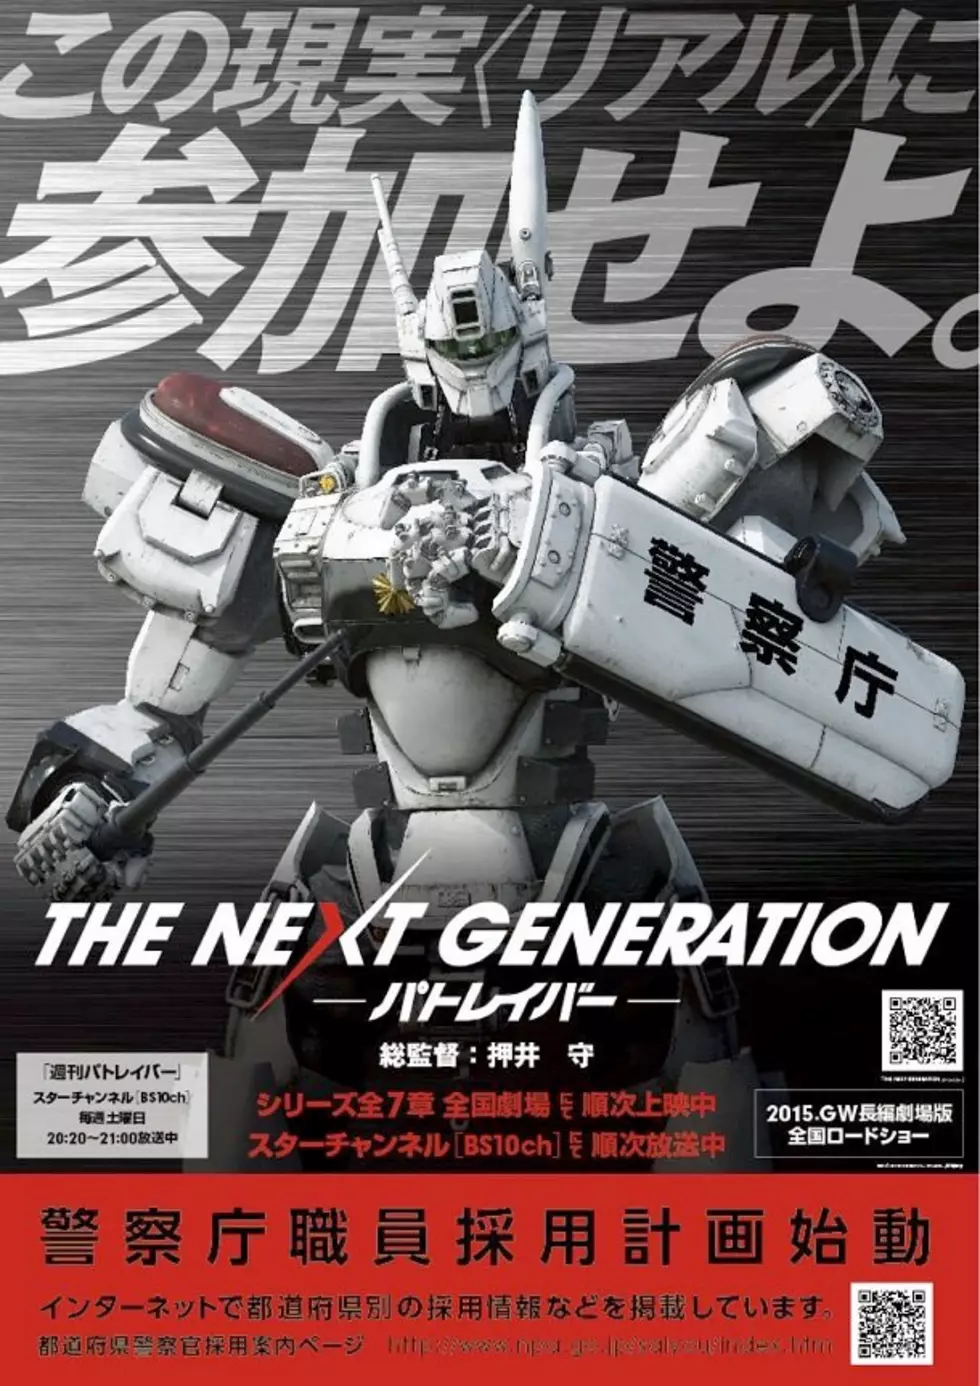 The Tokyo Police Department Teams With &#8216;Patlabor&#8217; For A Recruitment Drive, Will Probably Not Let You Actually Have A Mecha